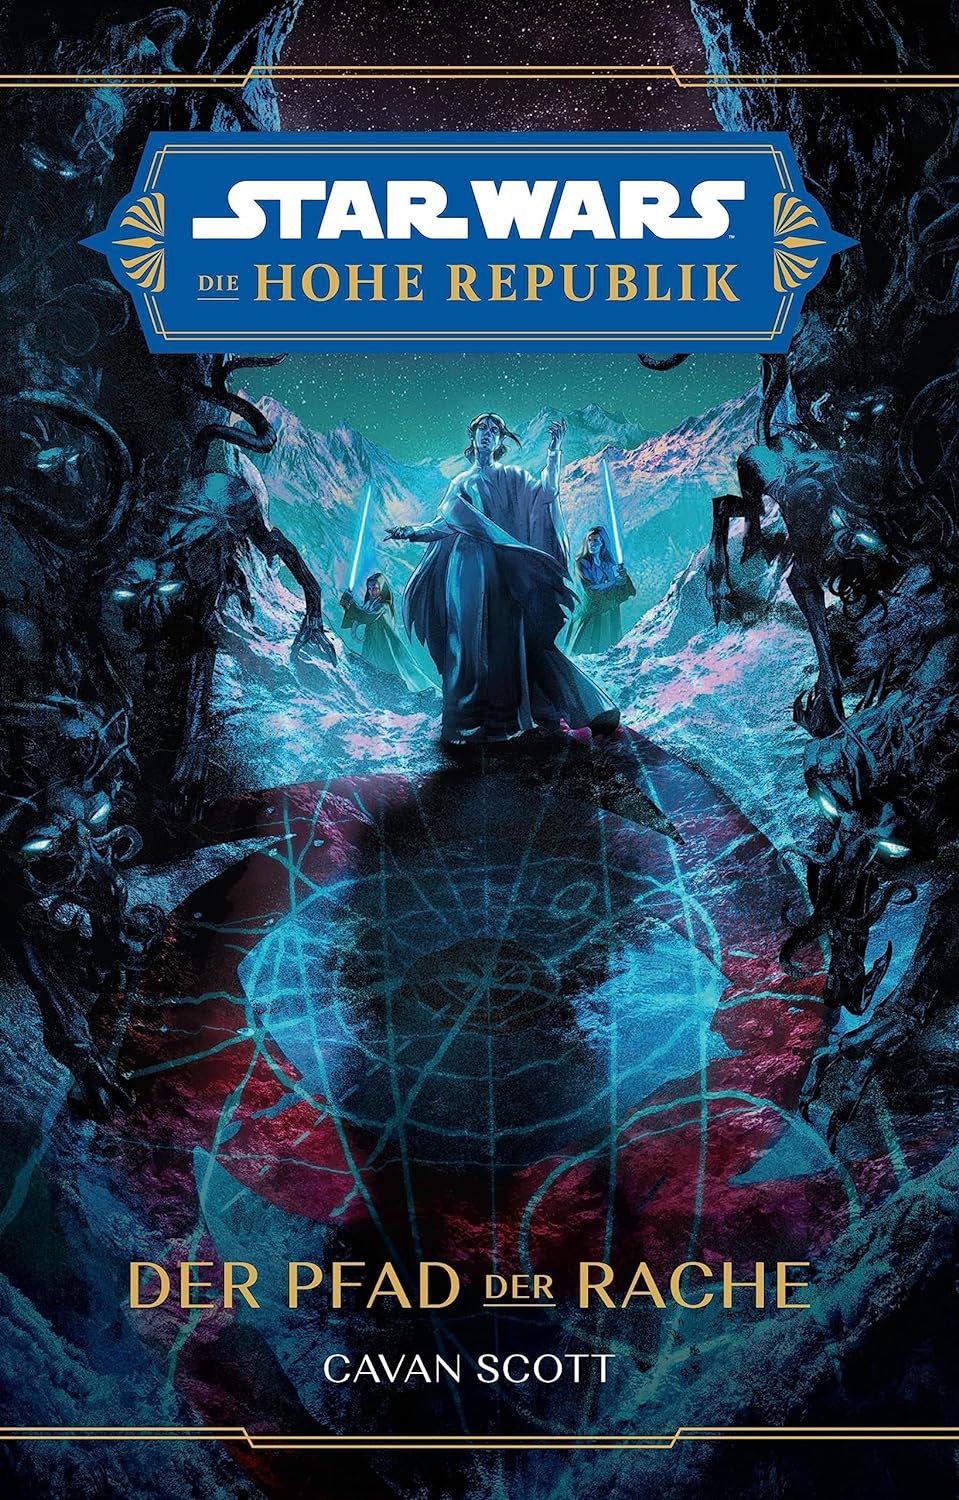 Review: “Star Wars: The High Republic: Path of Vengeance”